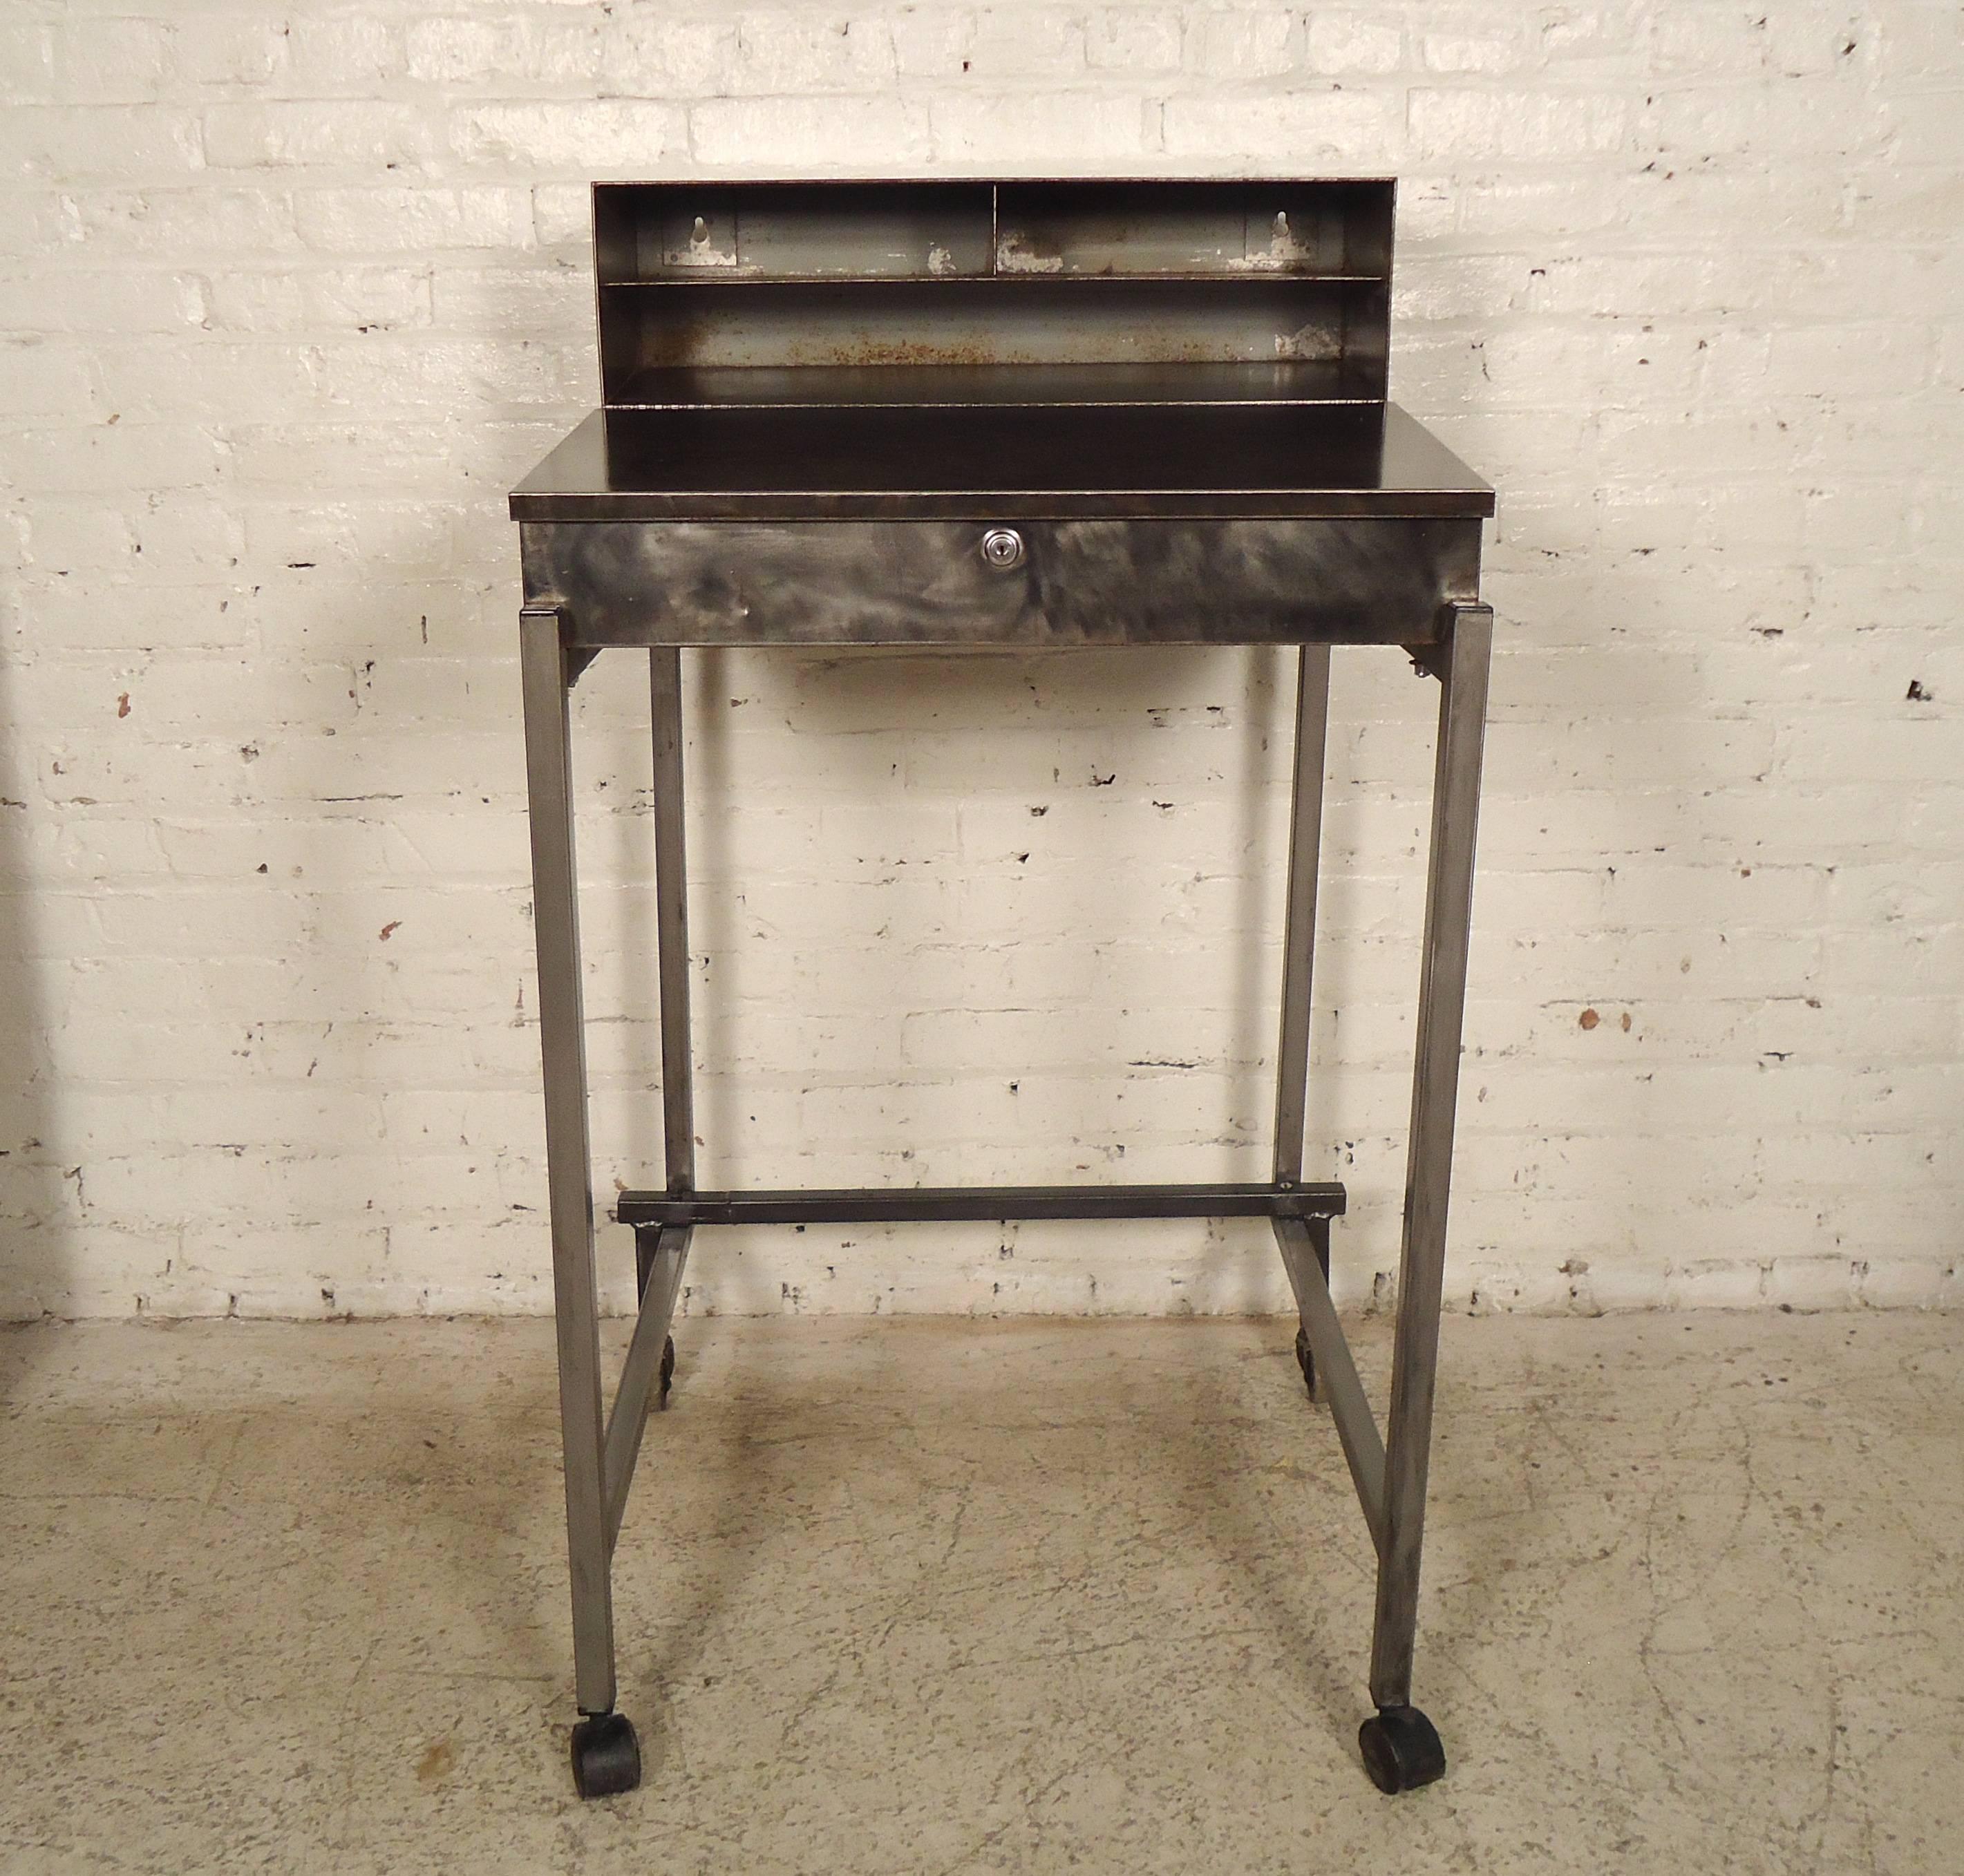 Vintage Industrial mobile factory shop desk or podium with top drawer and paper holder shelf, drawer contains a locking mechanism.
Measures: 33